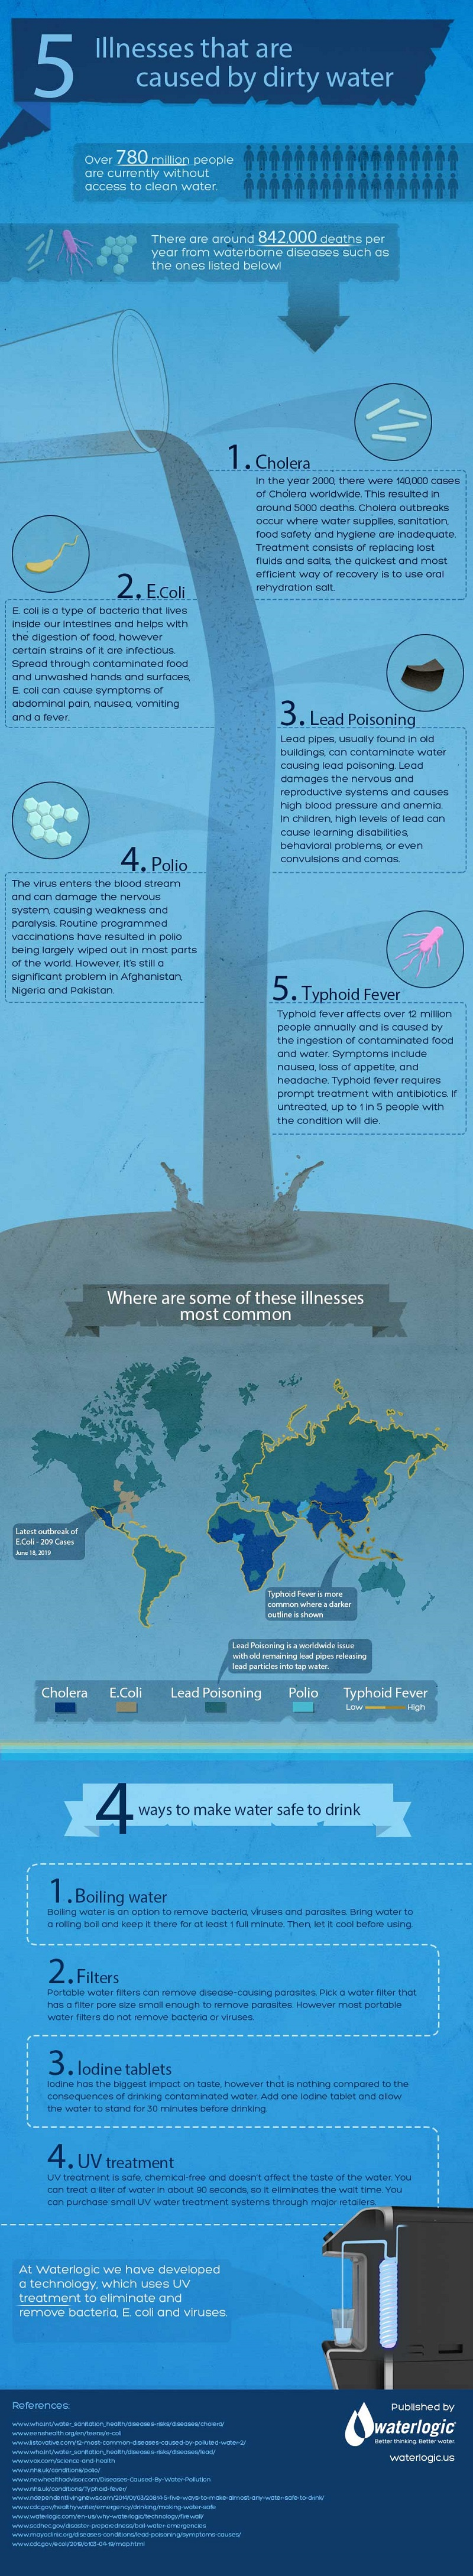 Infographic: 5 illnesses that are caused by dirty water